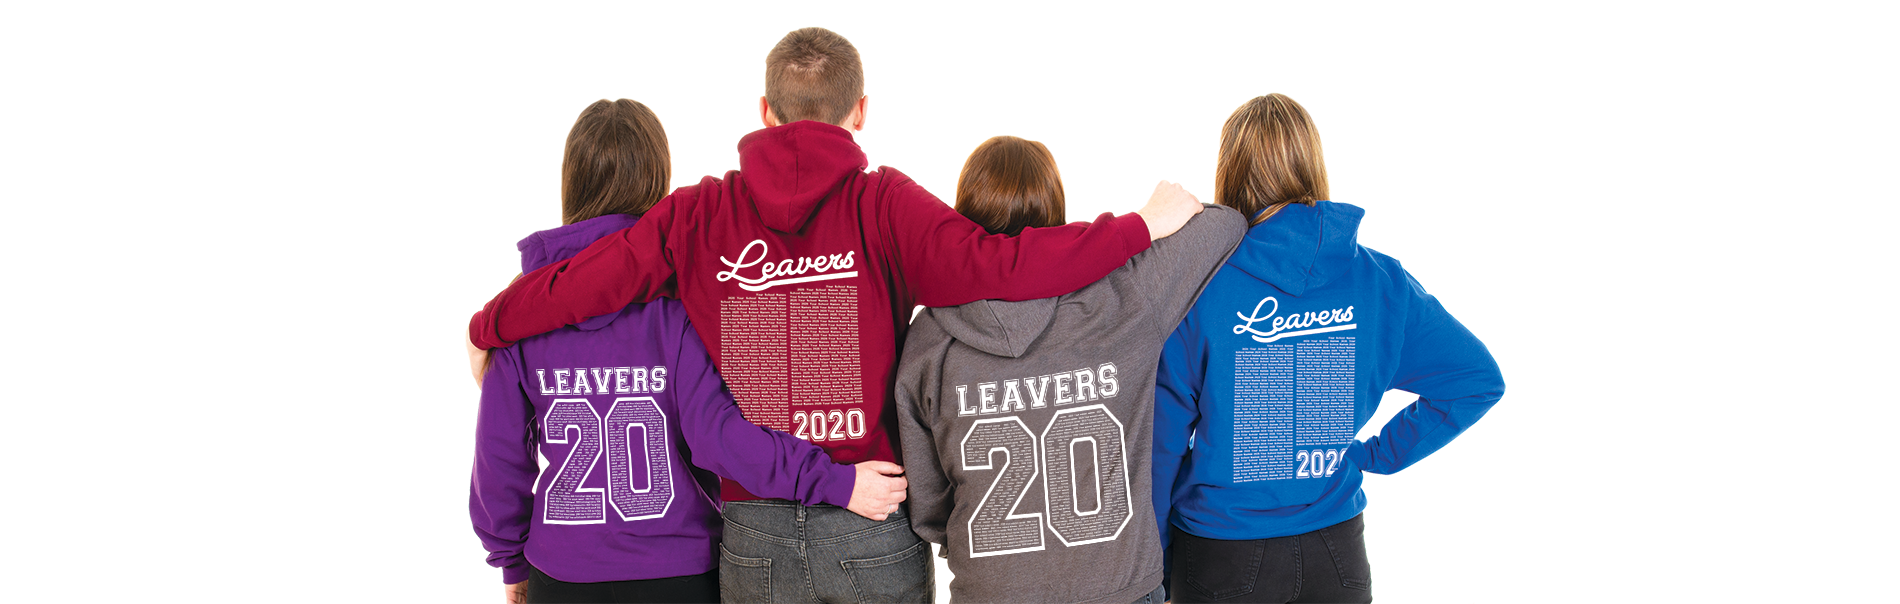 Leavers Products | Colorfoto School Photography & Marketing